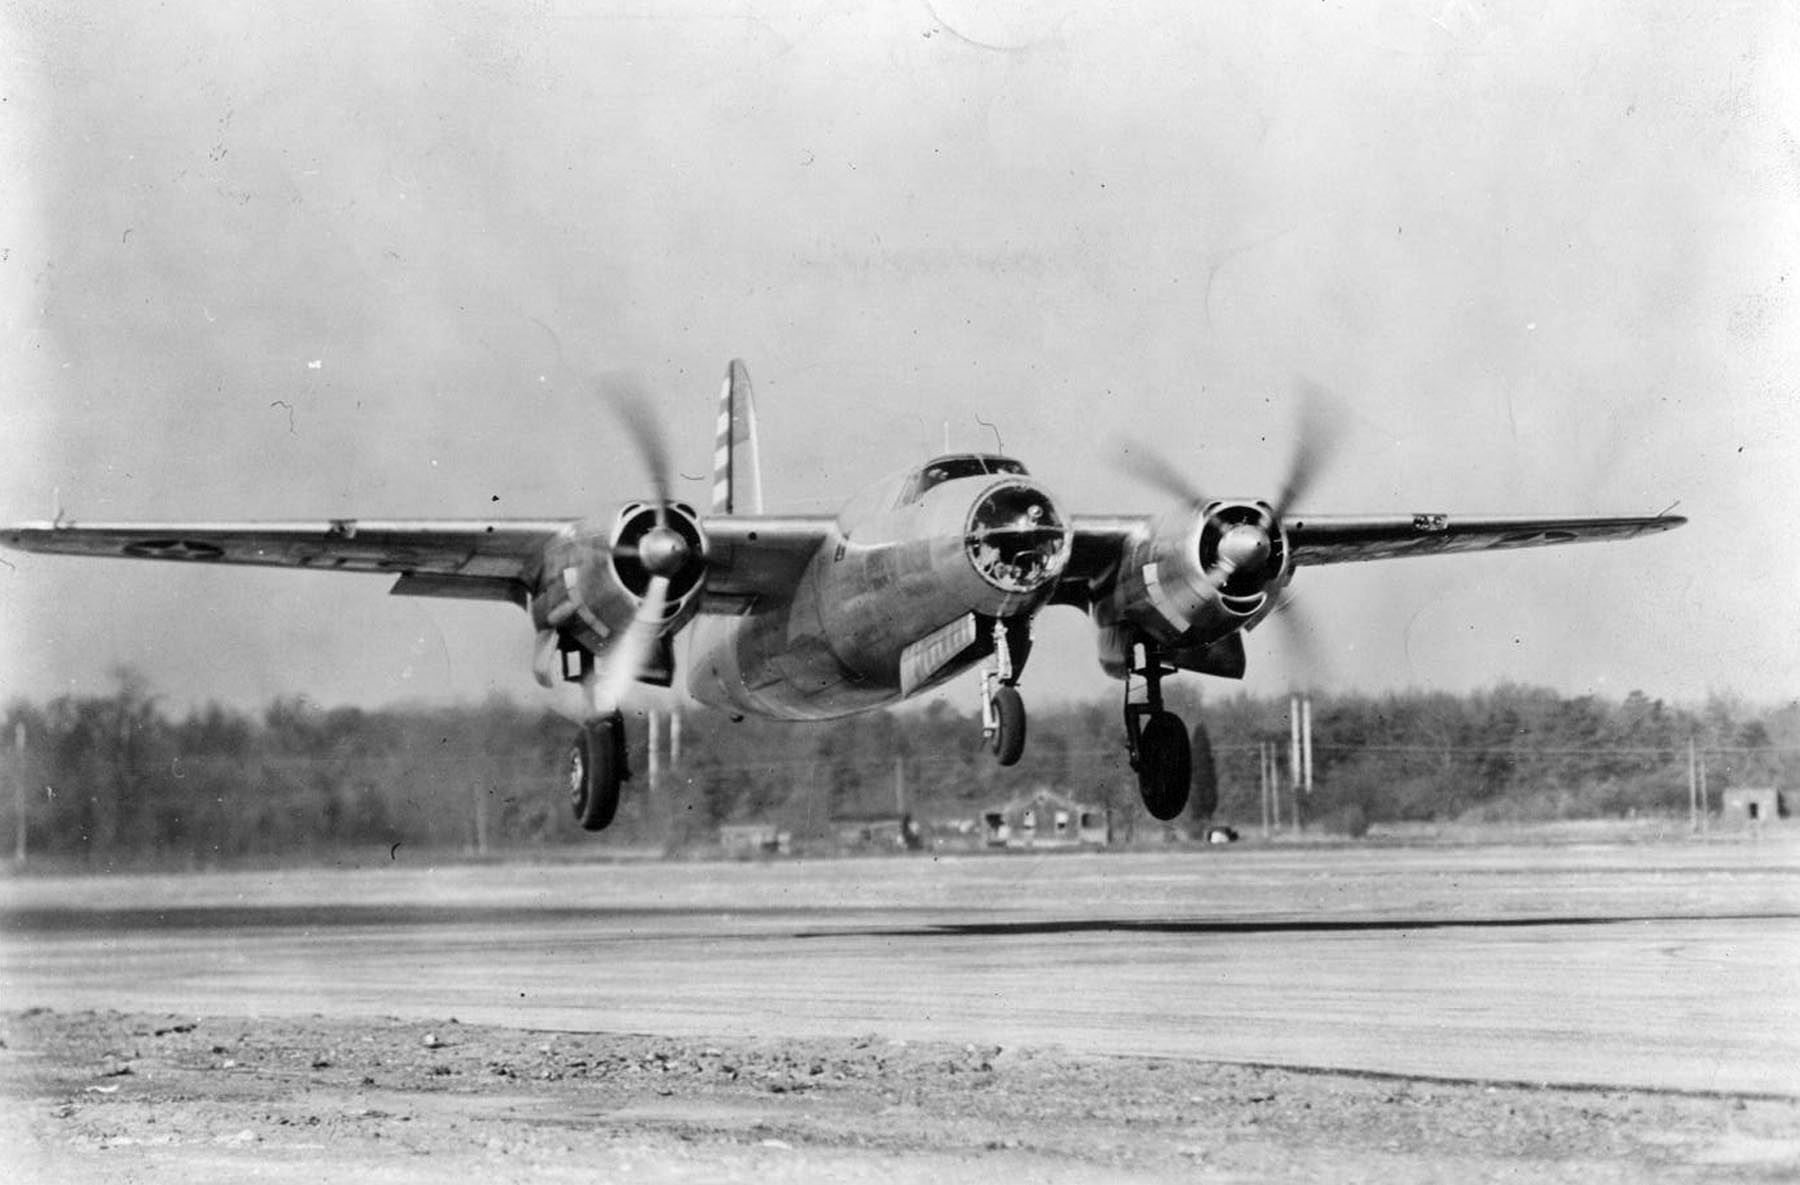 The first Martin Marauder, B-26-MA 40-1361, takes off for the first time at Middle River, Maryland, 25 November 1940. (U.S. Air Force)